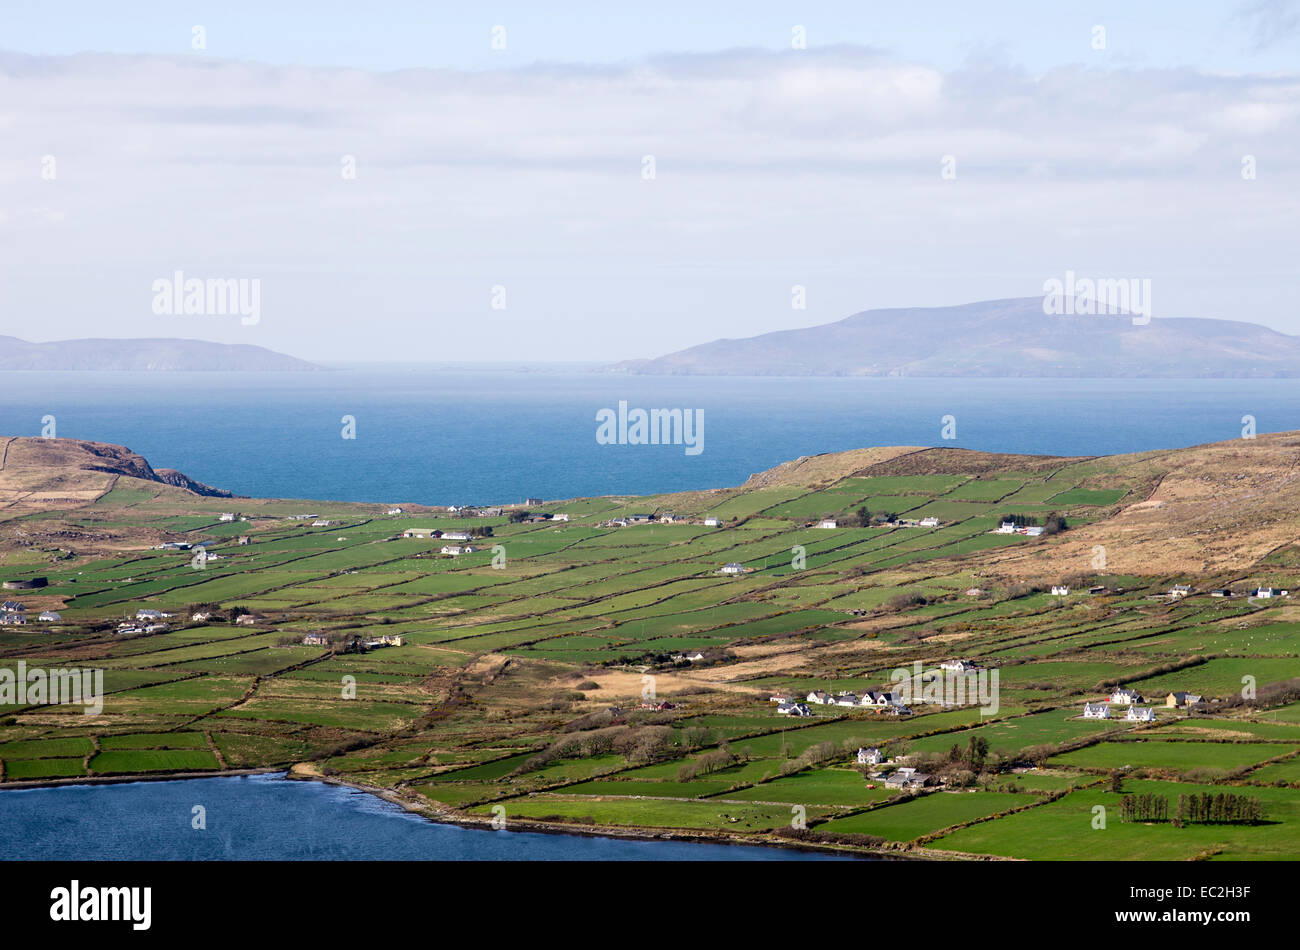 A view towards Beginish Island from the Ring of Kerry, Ireland. Stock Photo